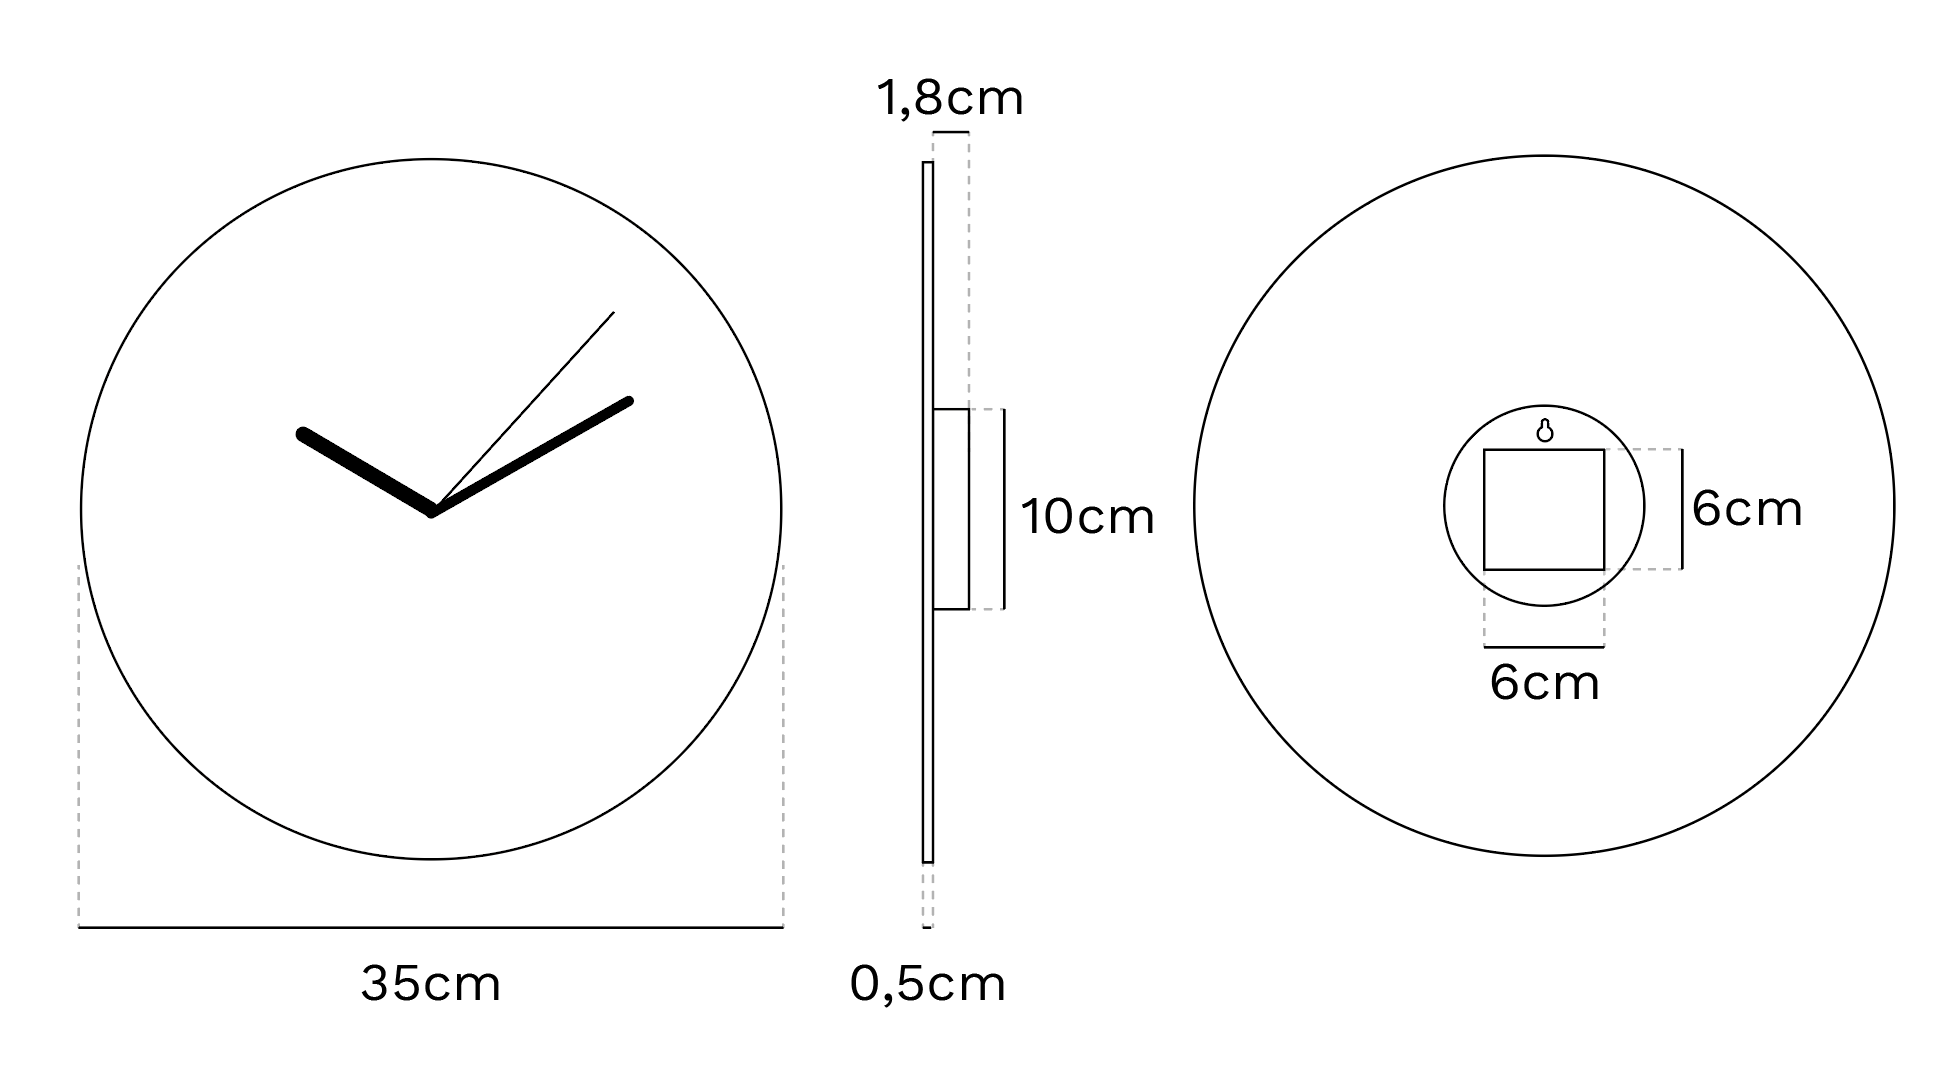 Drawing of the technical details of the "Pop Art" wall clock